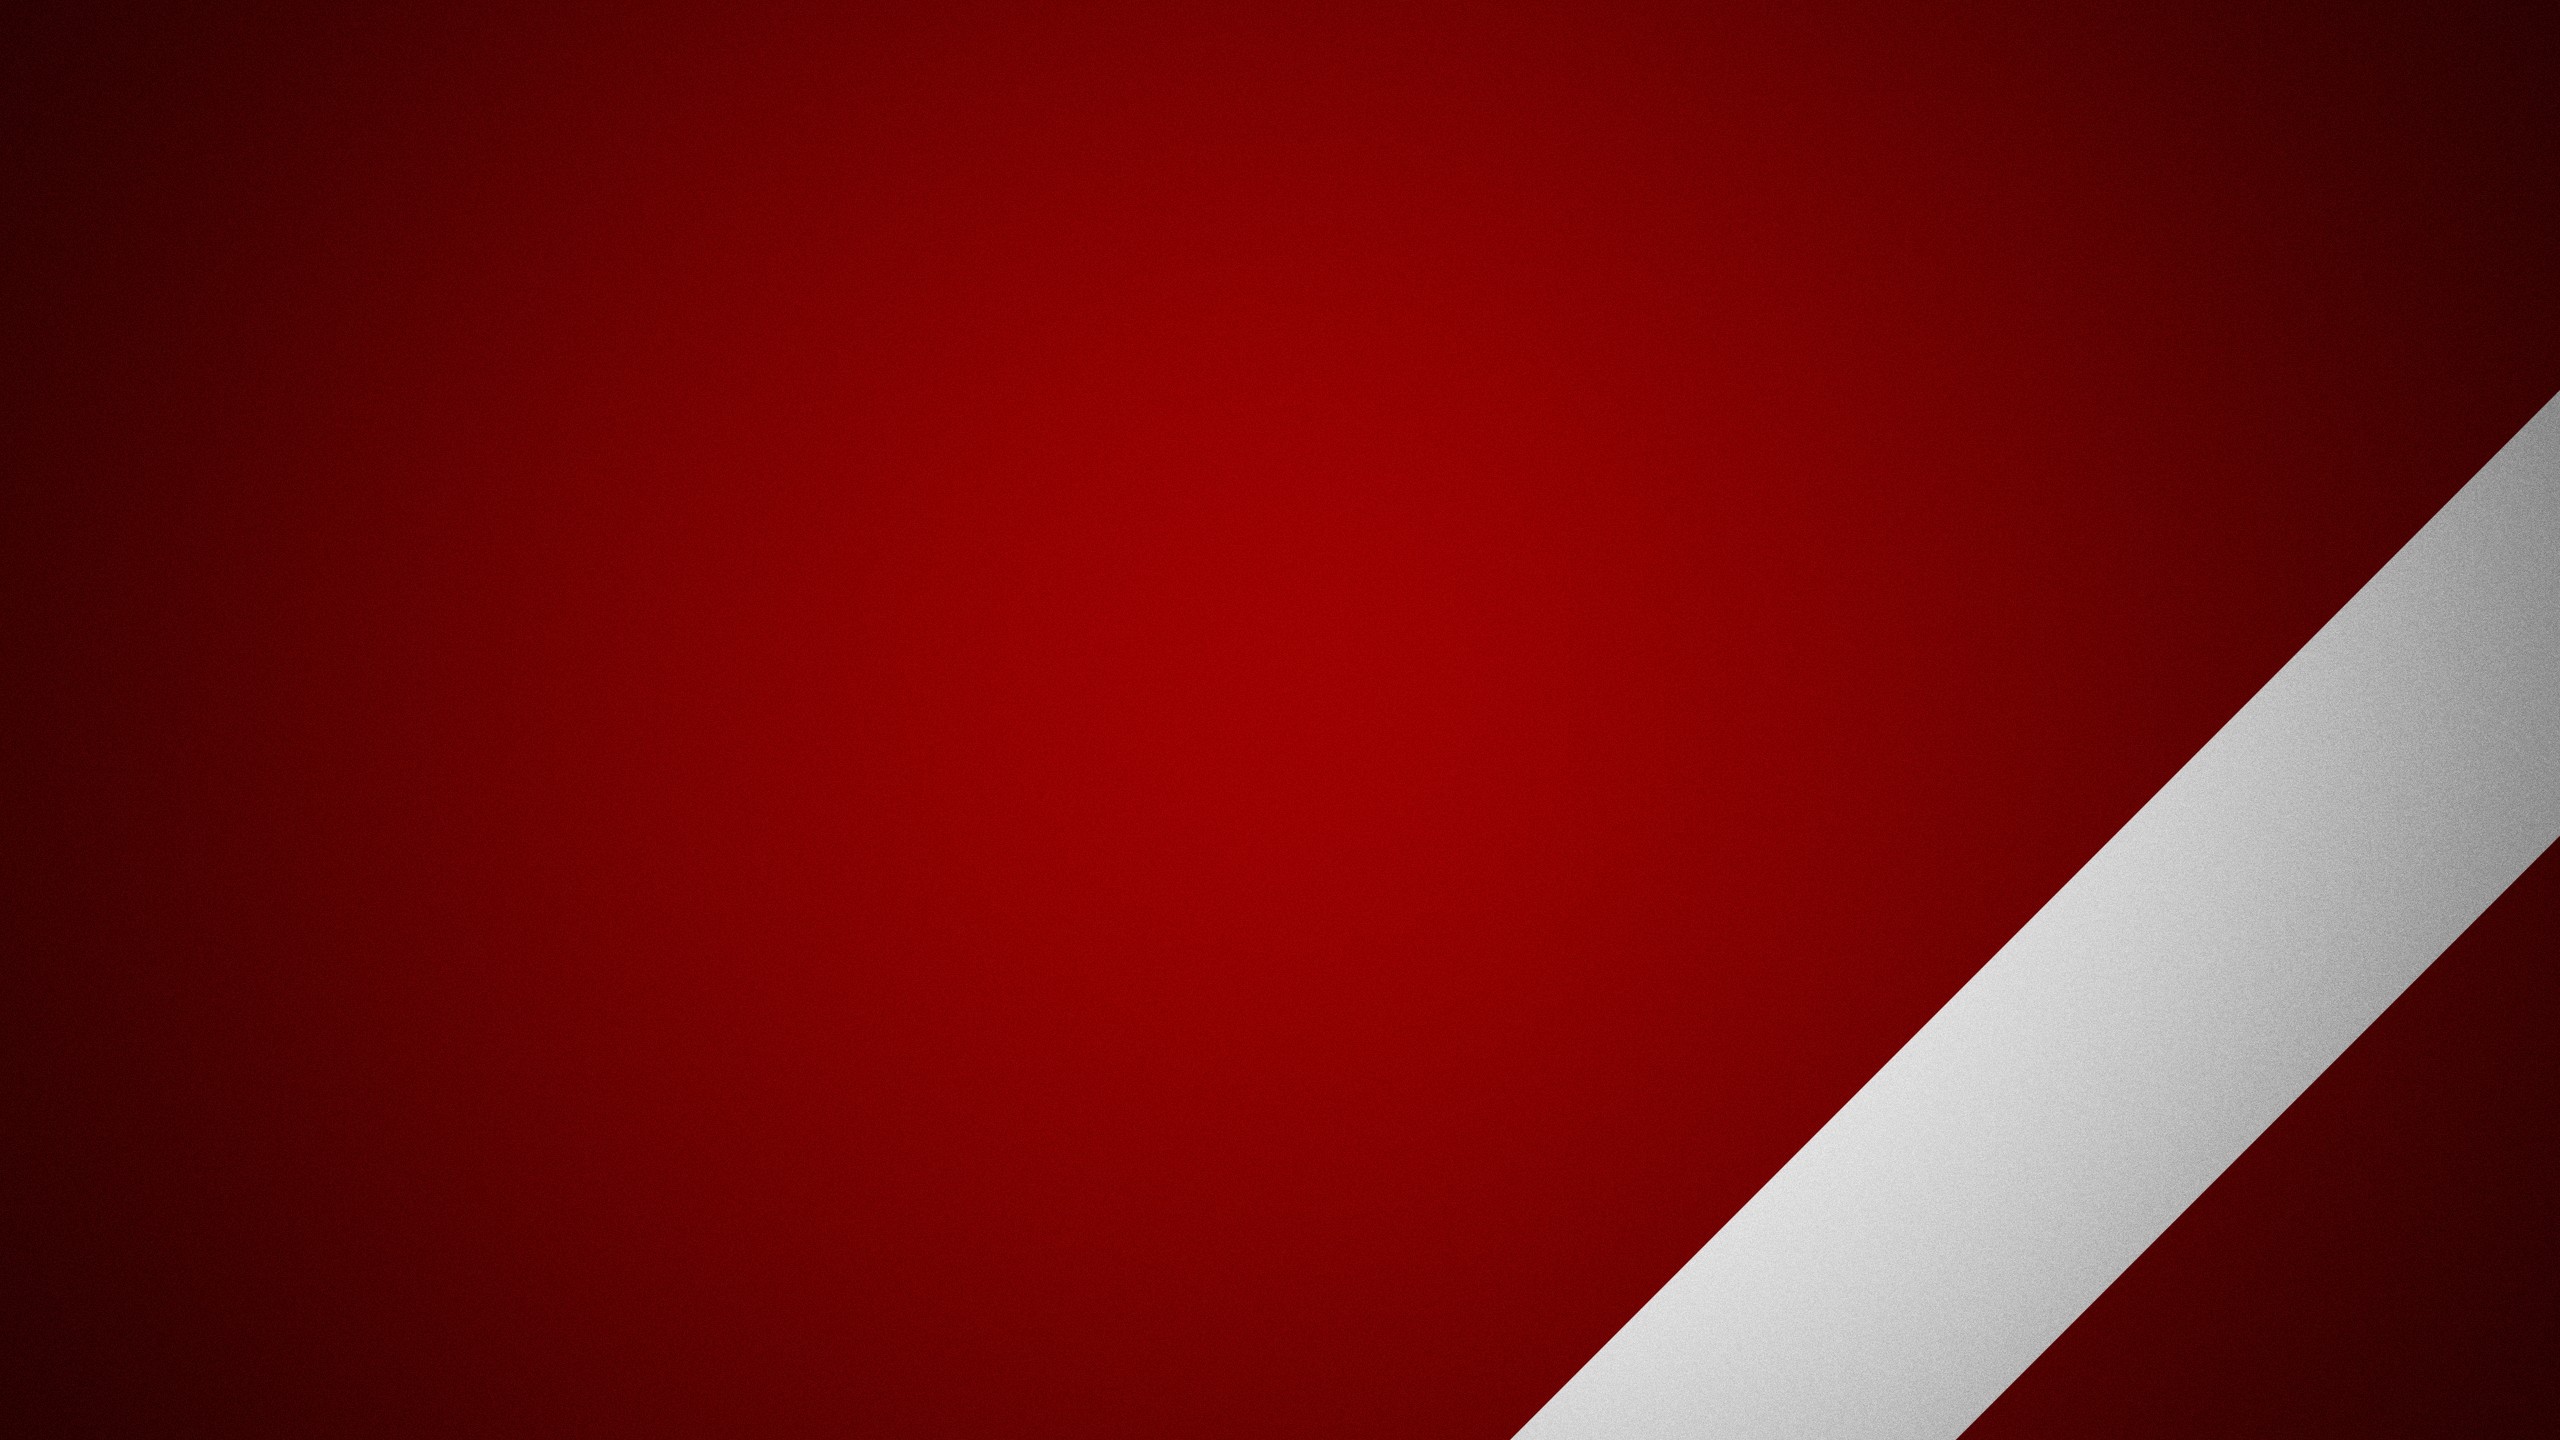 Red and white backgrounds